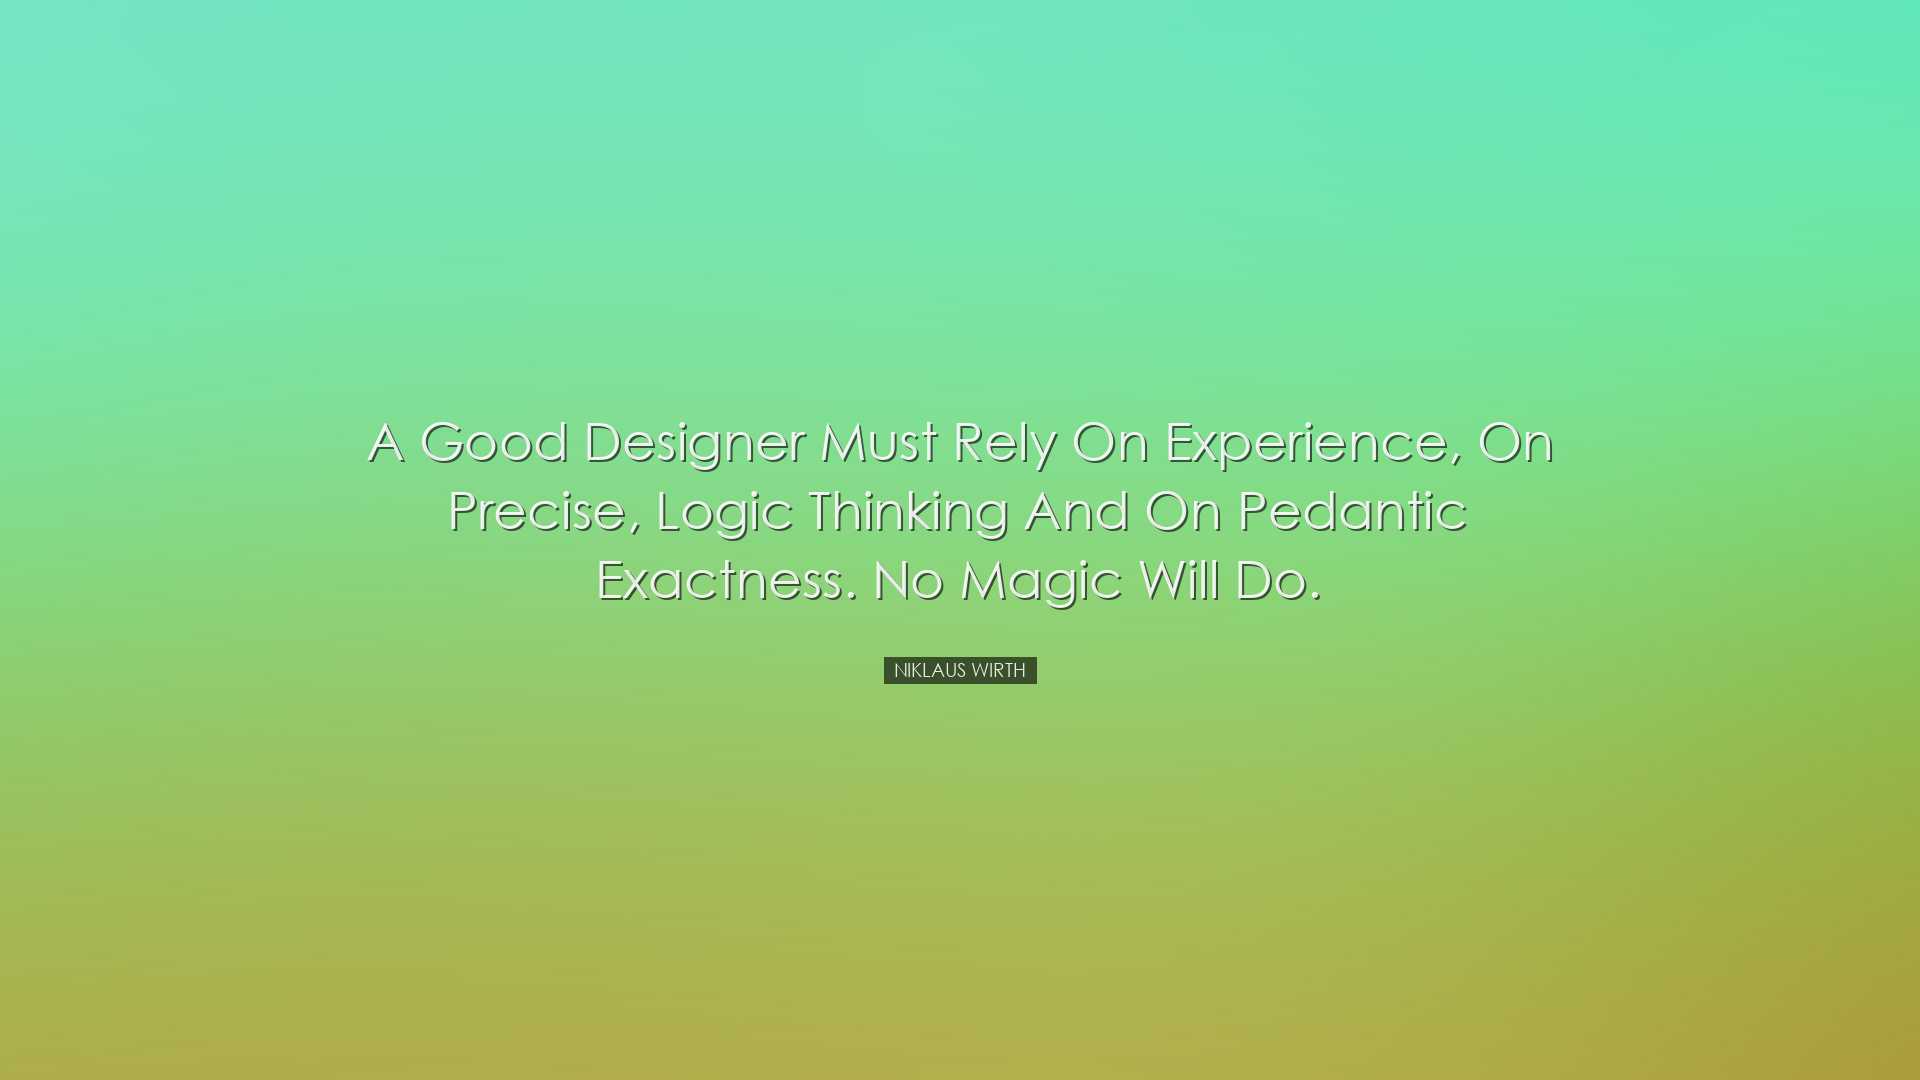 A good designer must rely on experience, on precise, logic thinkin